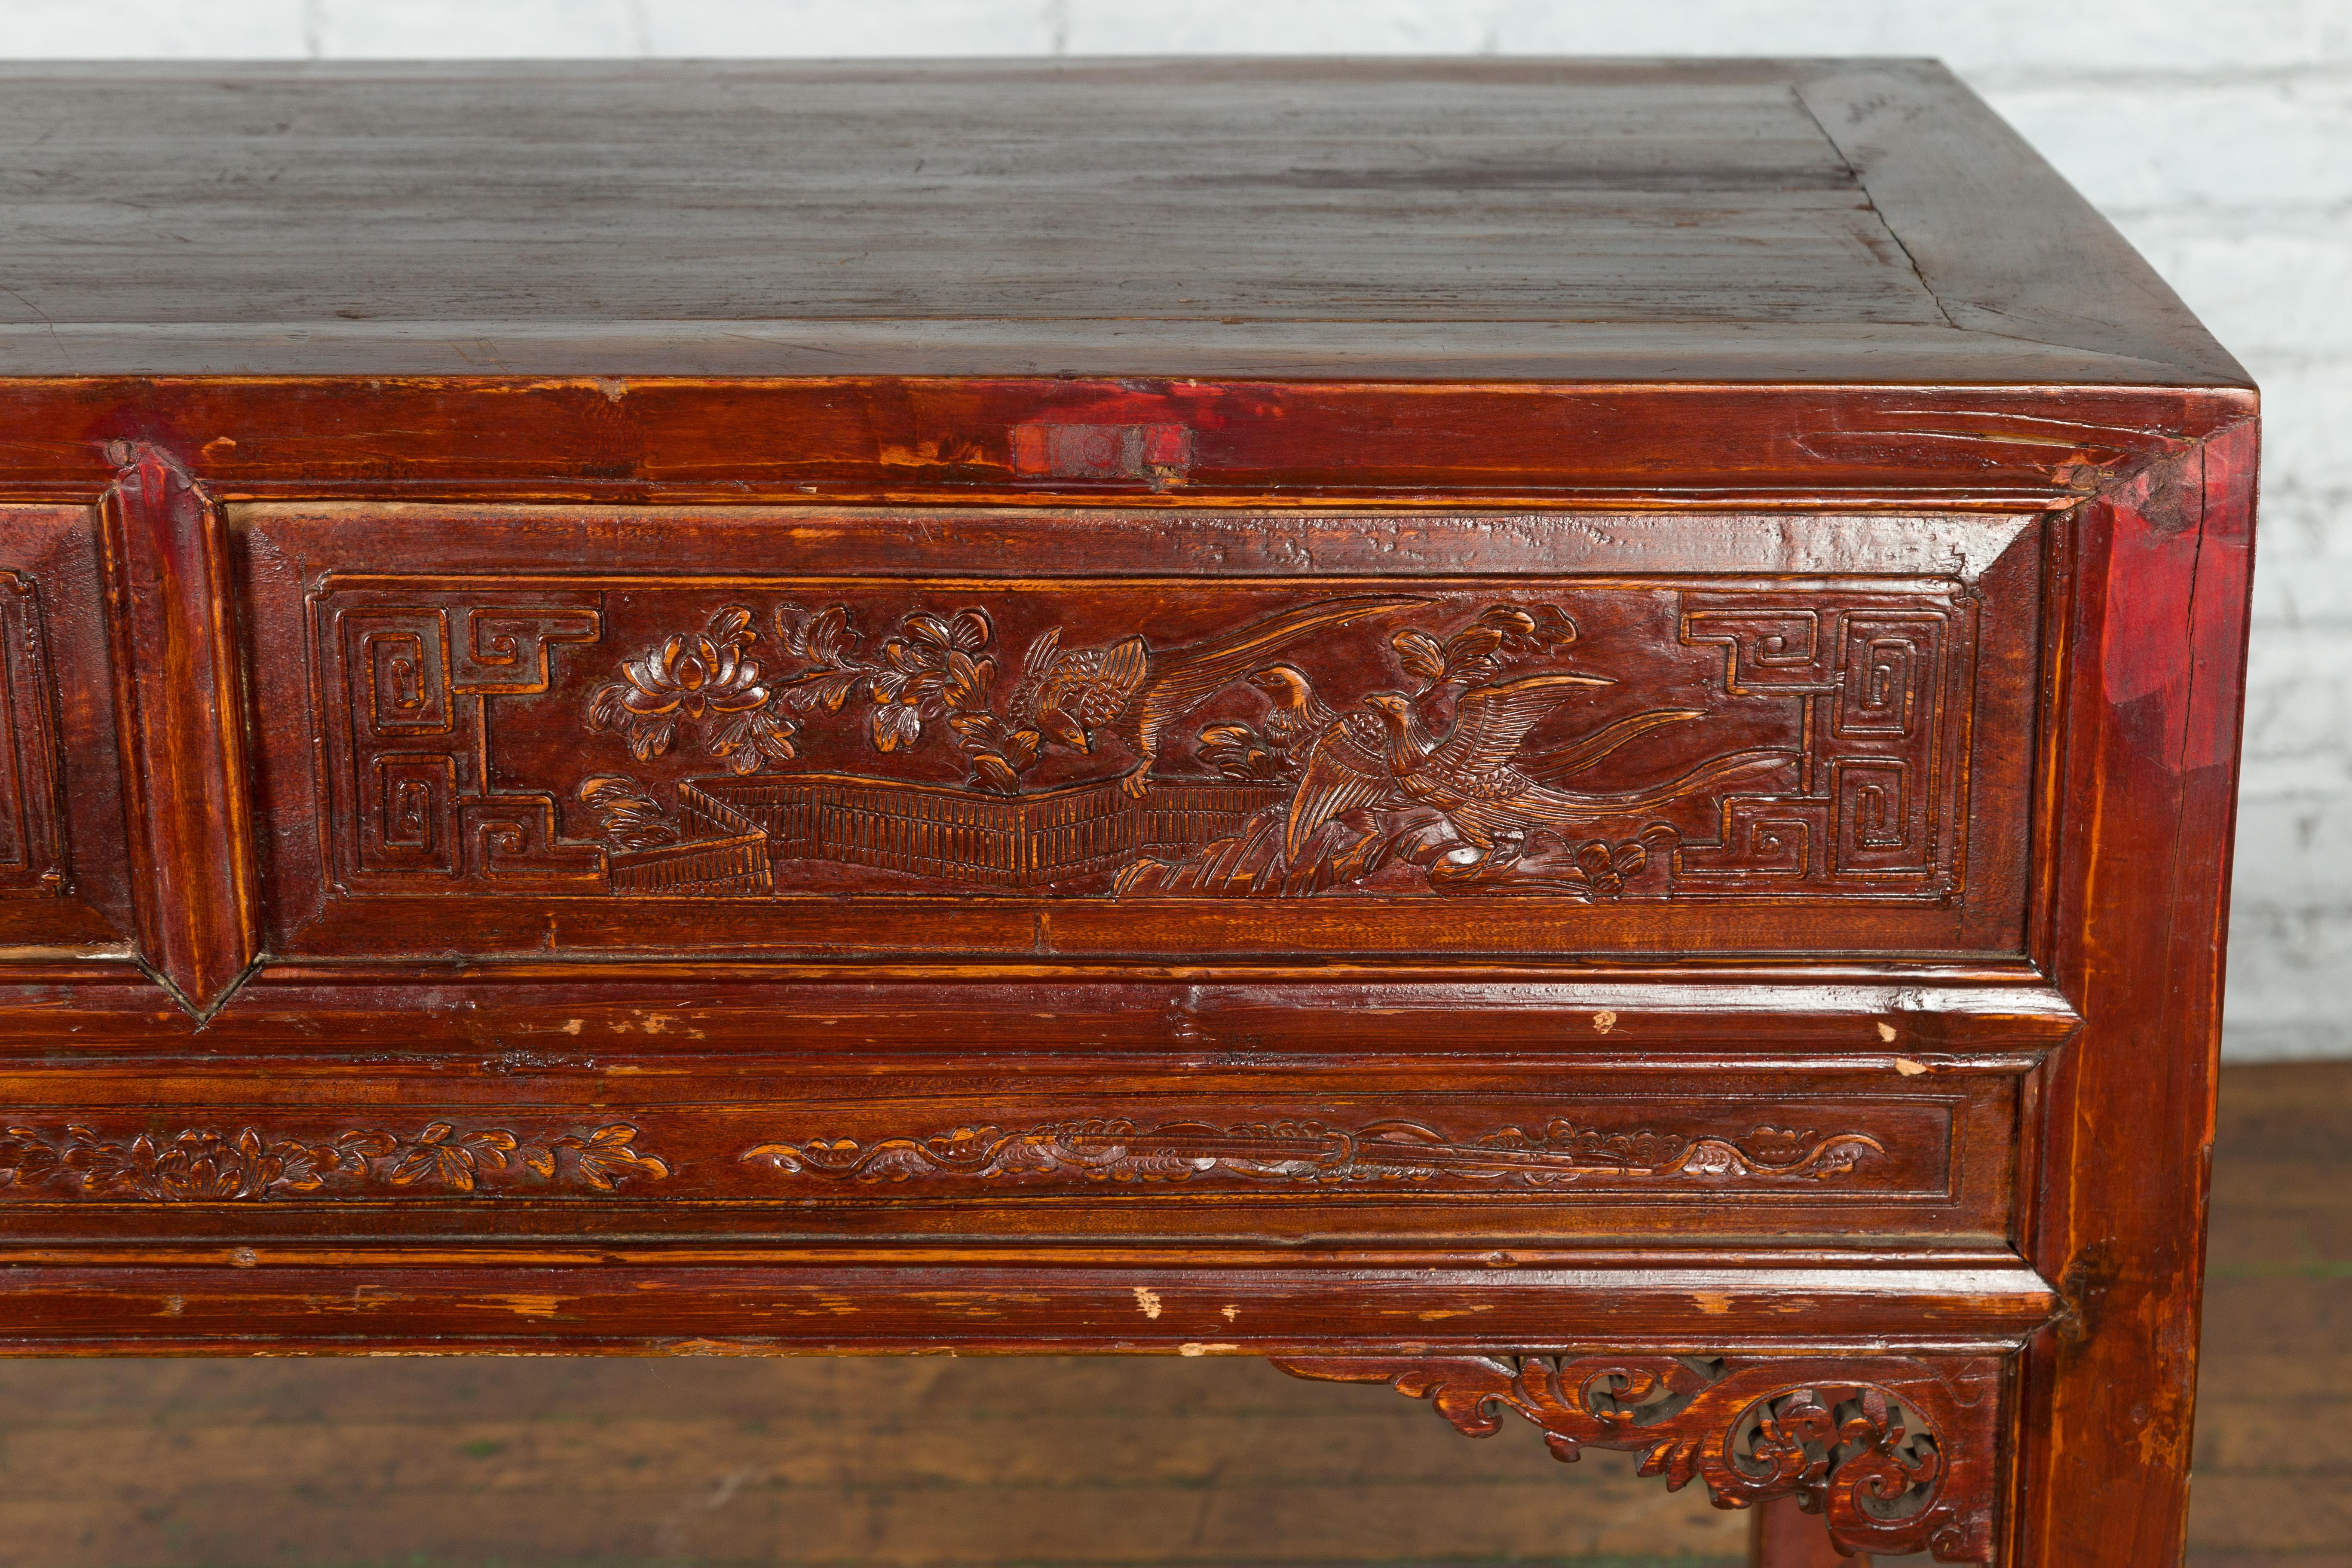 Chinese Qing Dynasty Period 19th Century Reddish Brown Table with Two Drawers For Sale 14